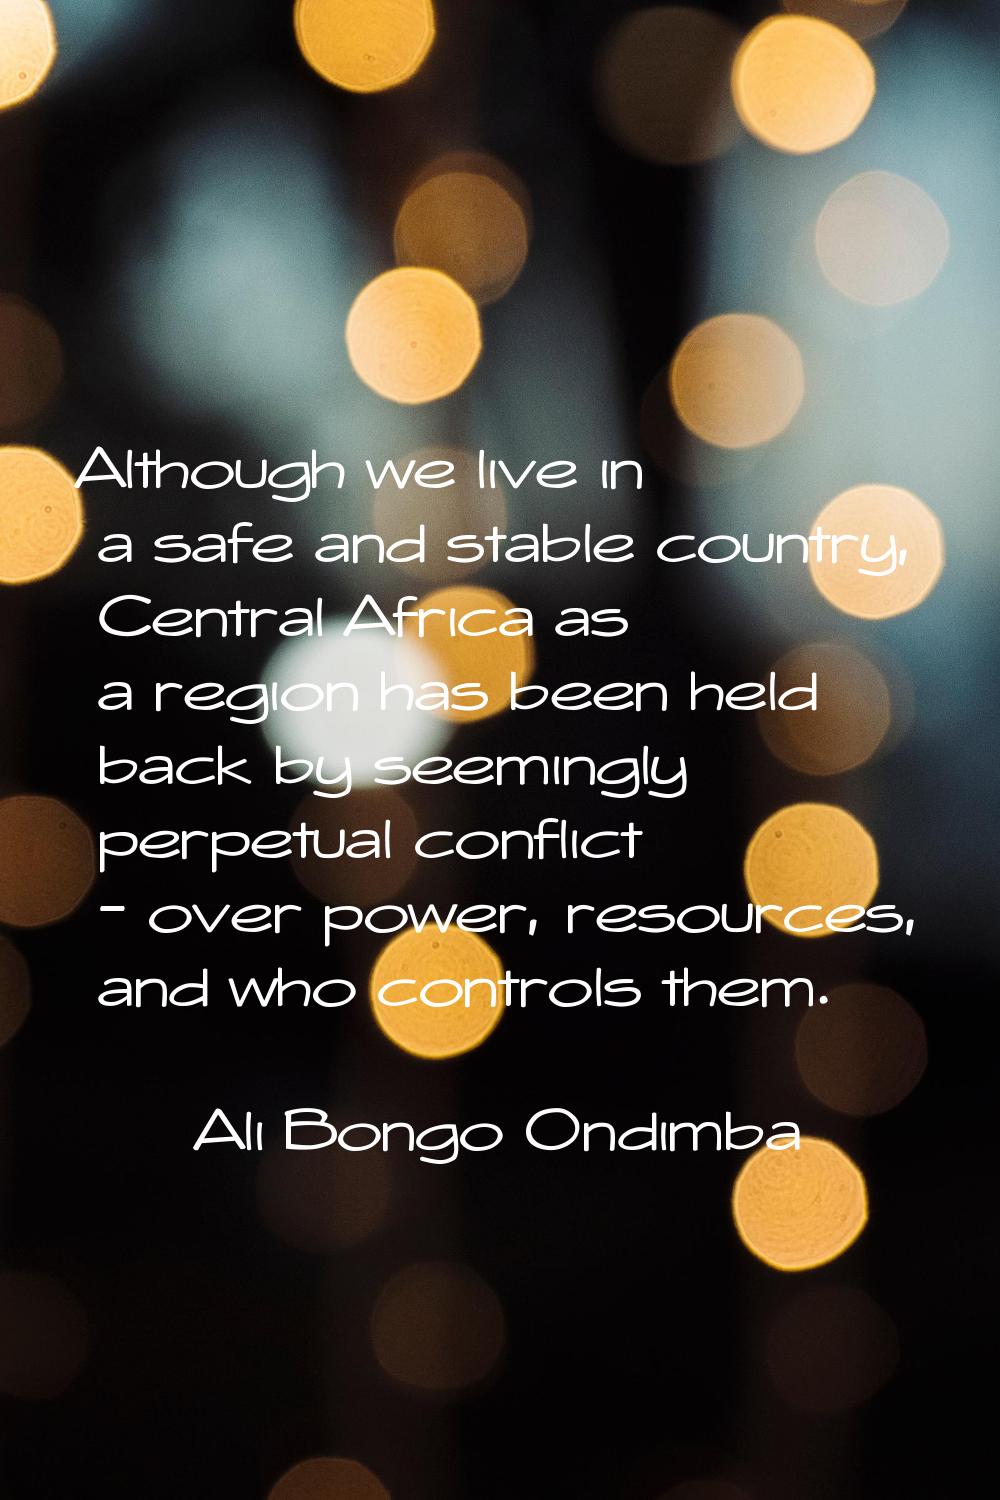 Although we live in a safe and stable country, Central Africa as a region has been held back by see